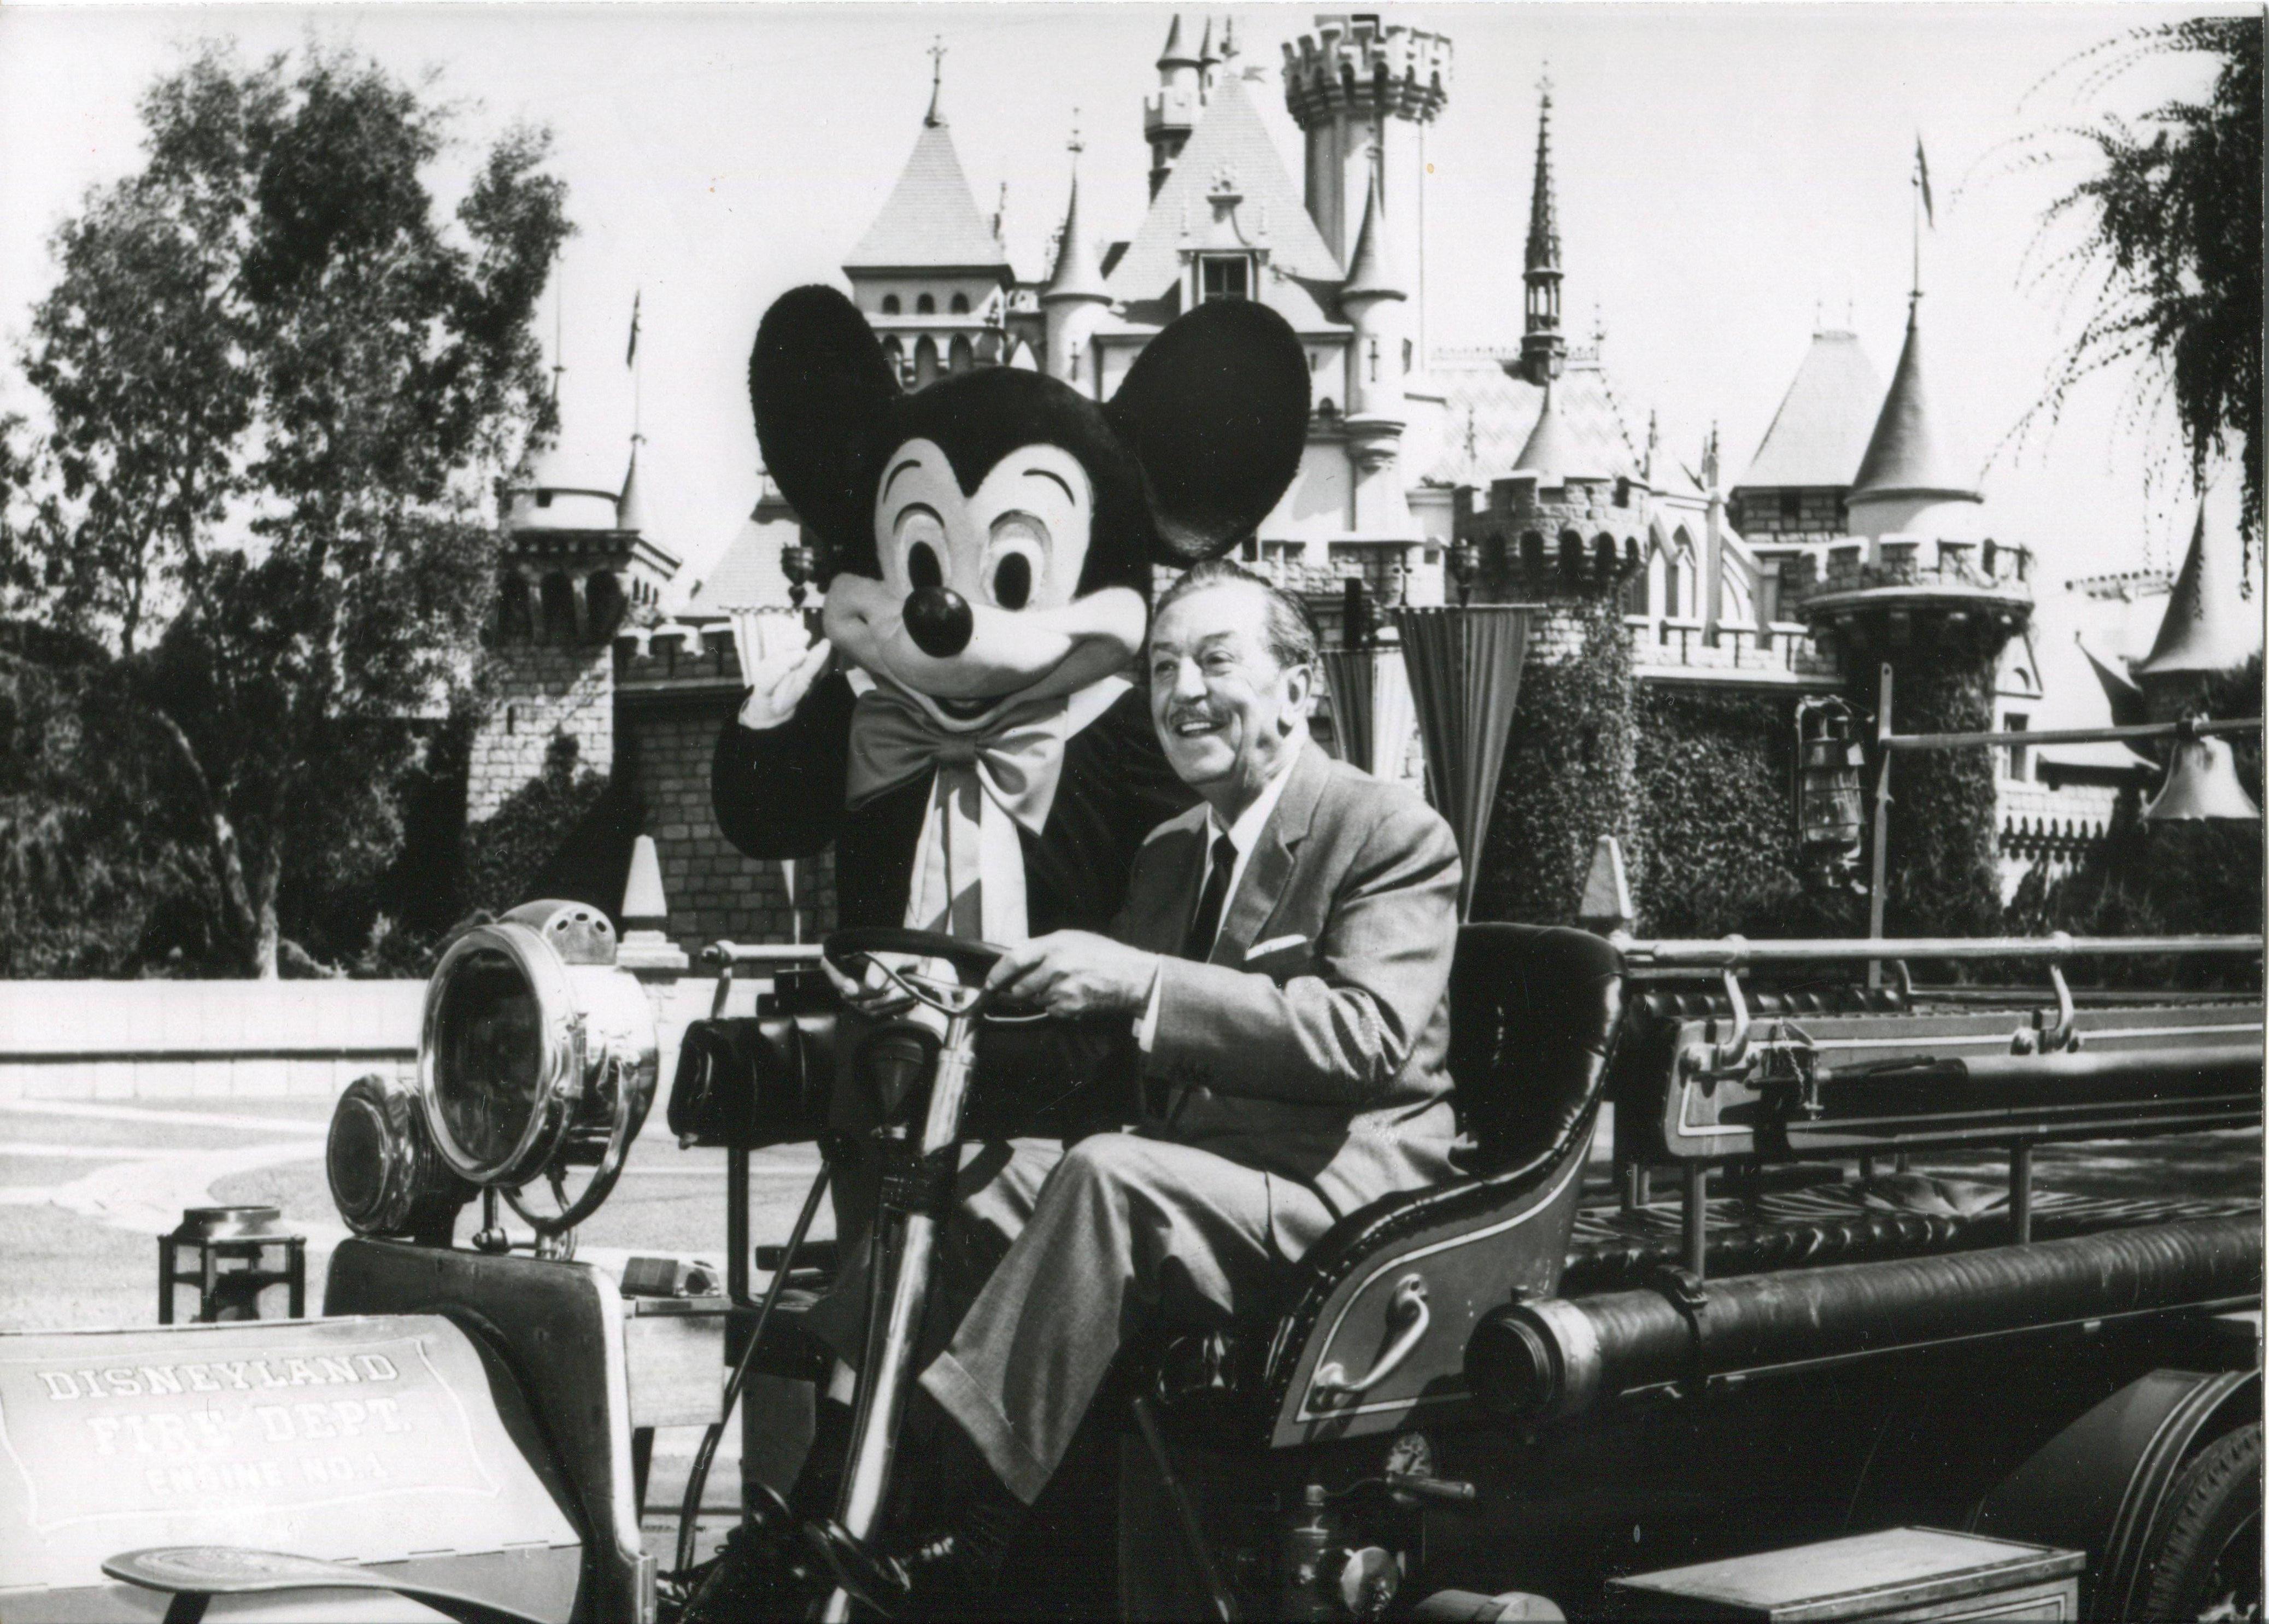 Unknown - Walter "Walt" Disney and Mickey Mouse in Disneyland - Original Press For Sale at 1stDibs